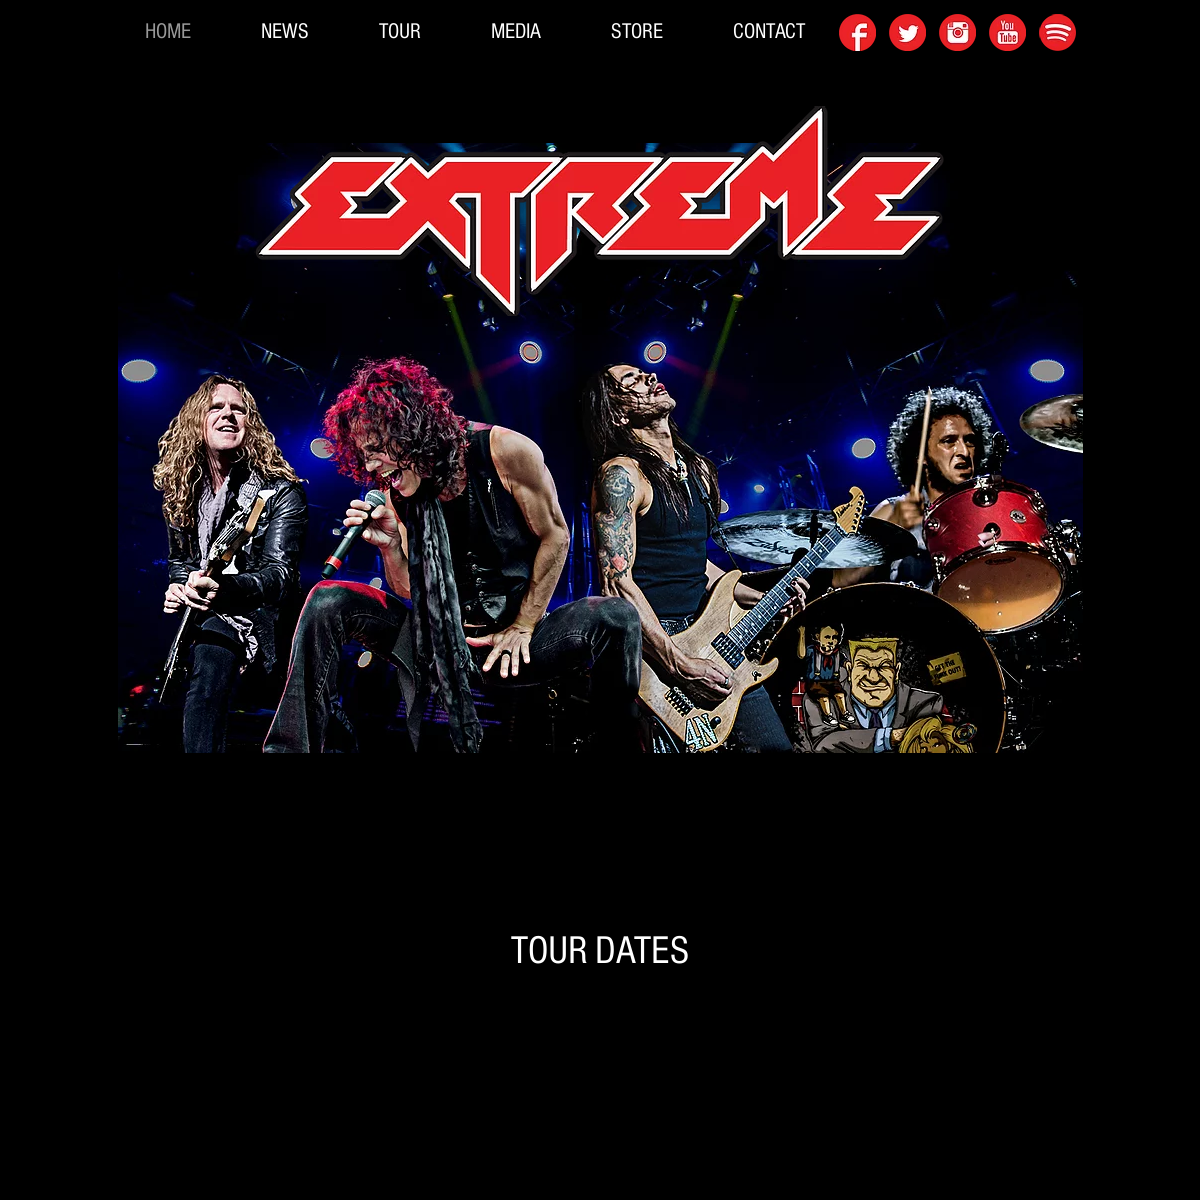 A complete backup of extreme-band.com